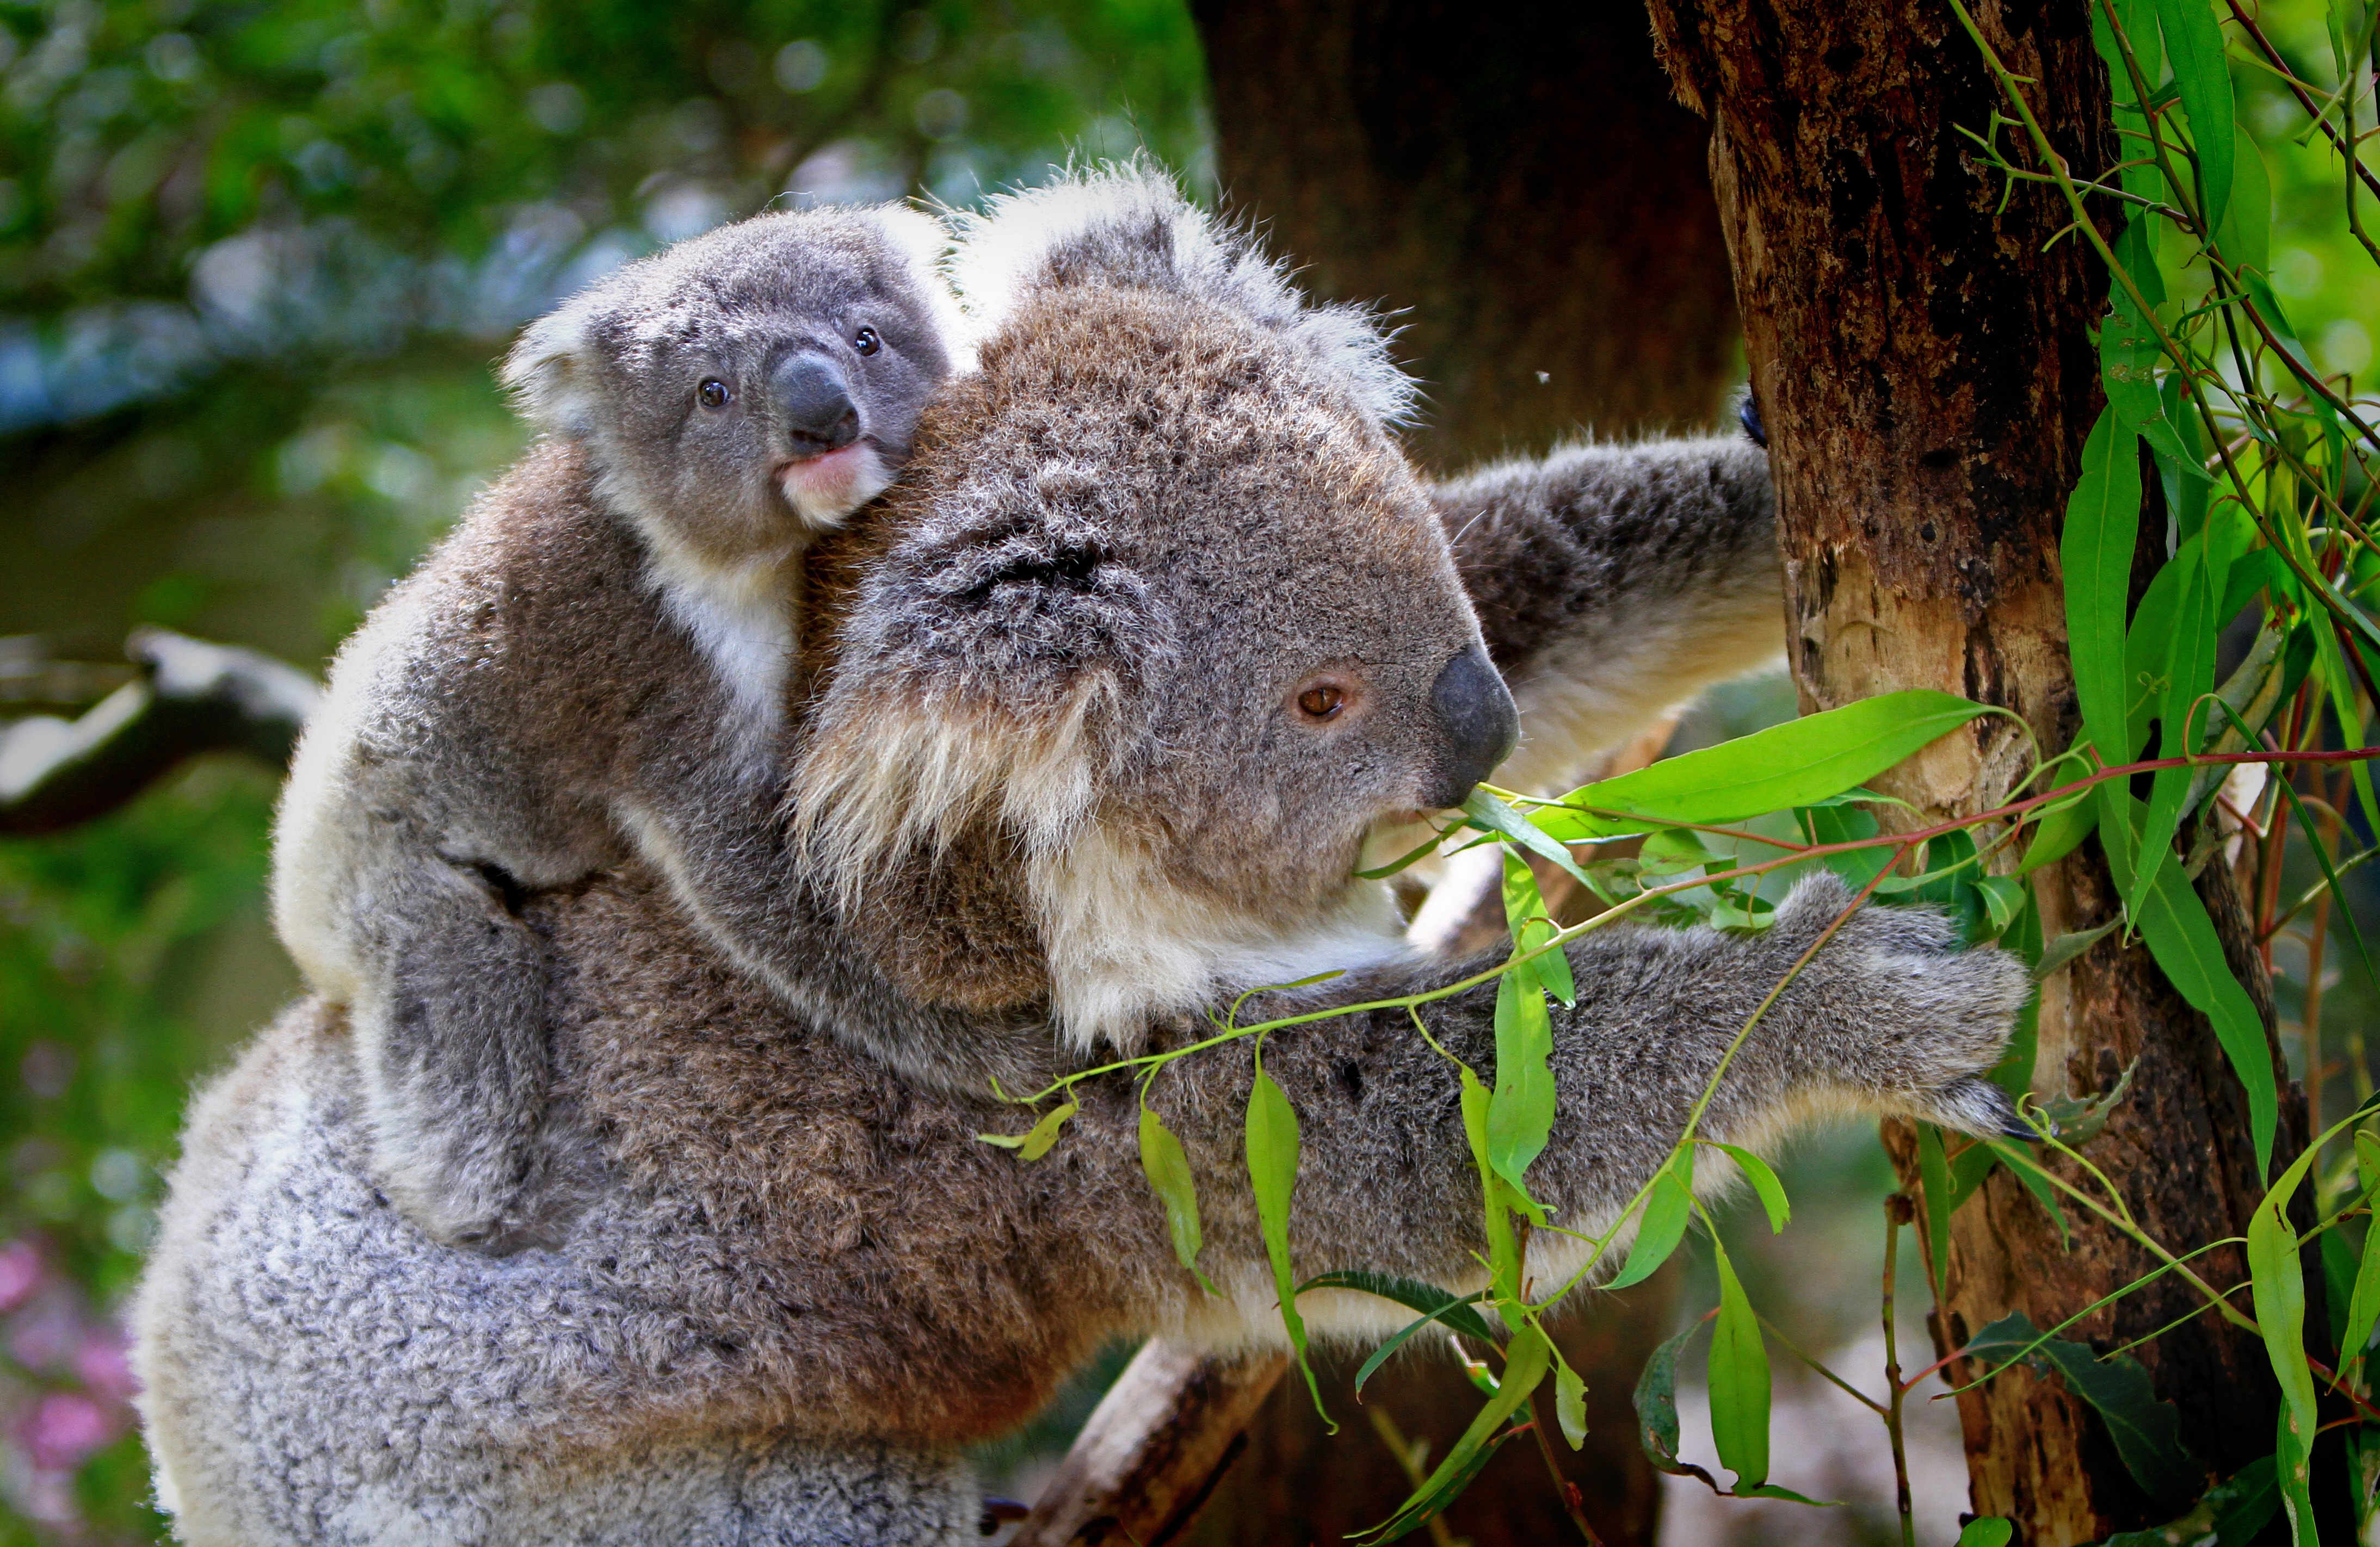 60823 download wallpaper animals, wood, young, tree, joey, koala, eucalyptus screensavers and pictures for free